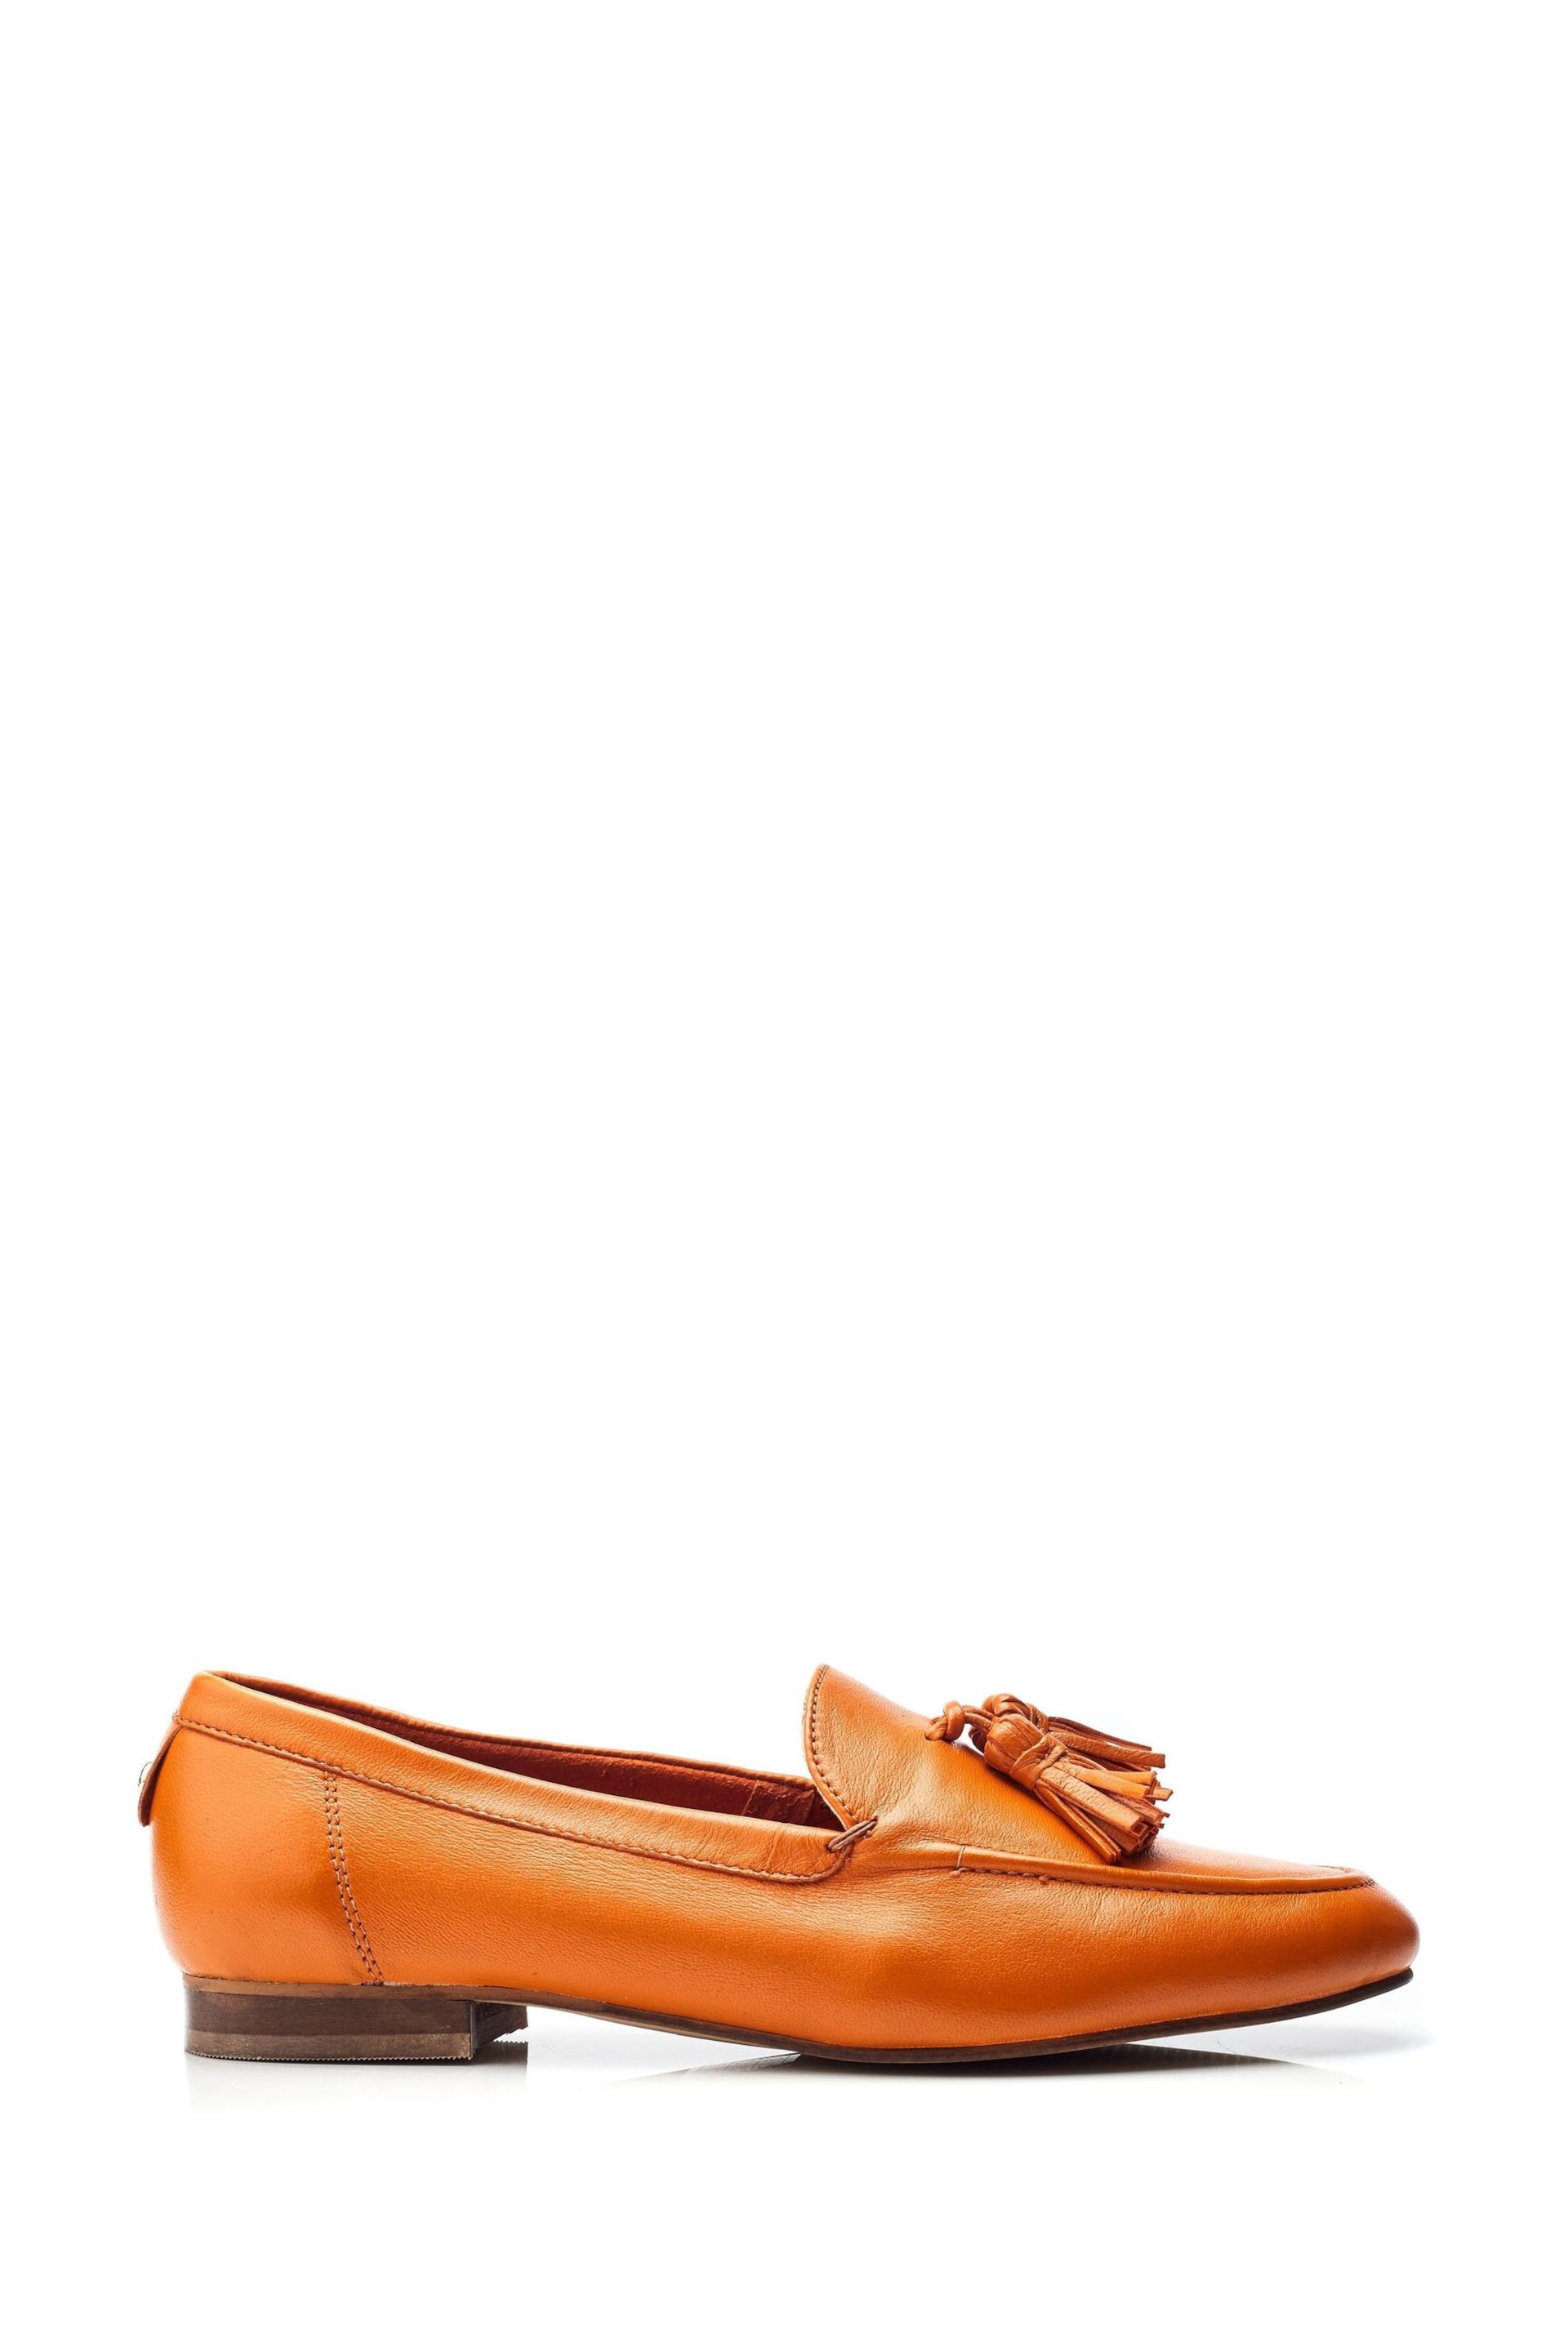 Moda in Pelle Ellmia Clean Loafer With Tassle - Image 1 of 4